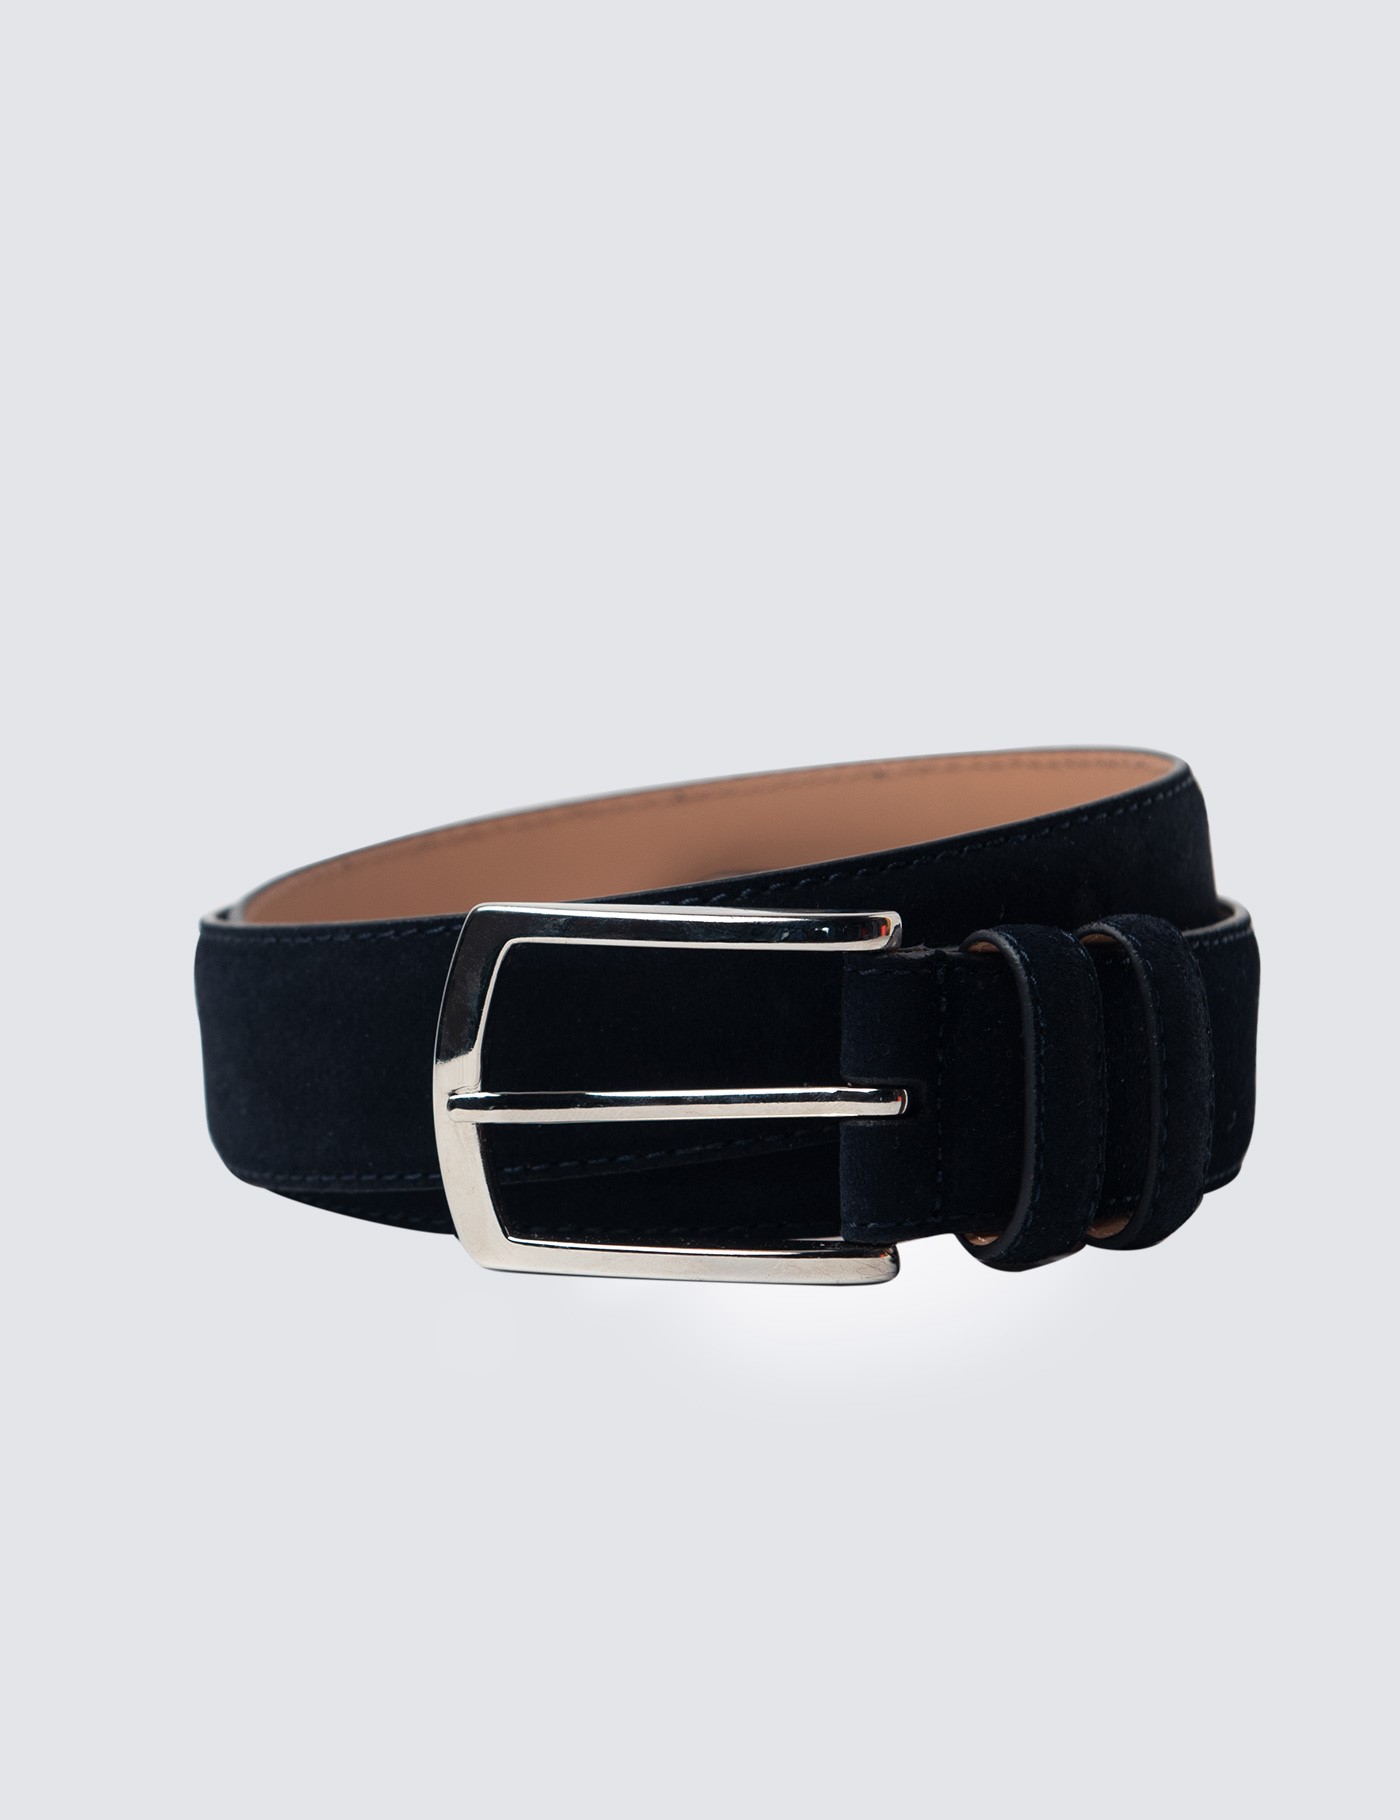 Brown Suede Belt – The Helm Clothing